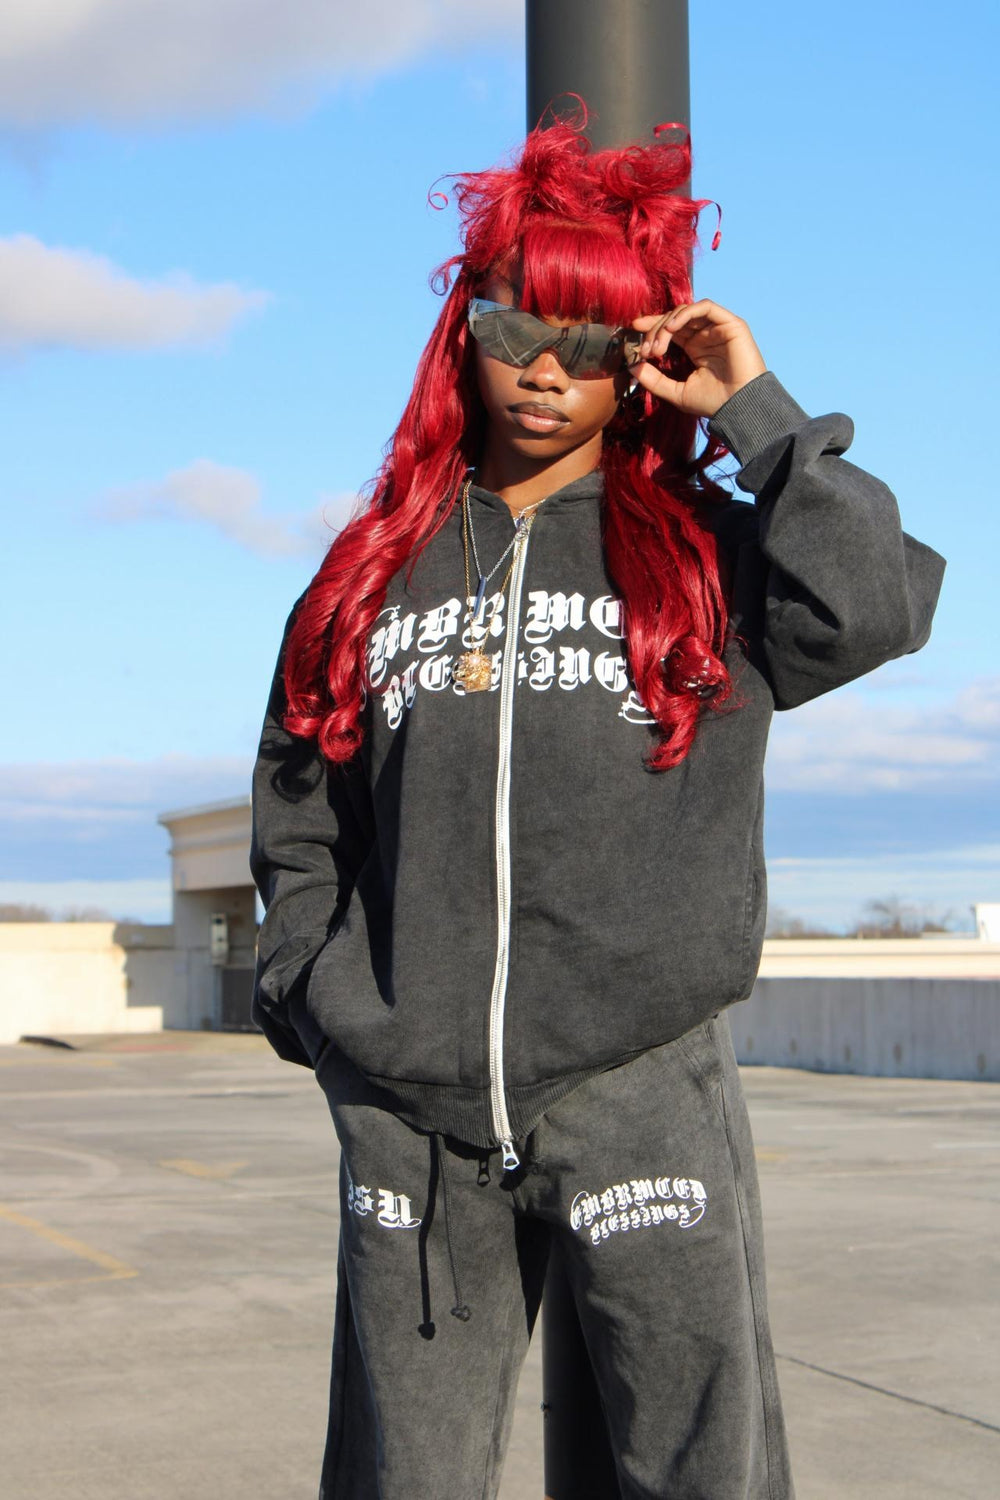 Embraced Blessings Sweatsuit